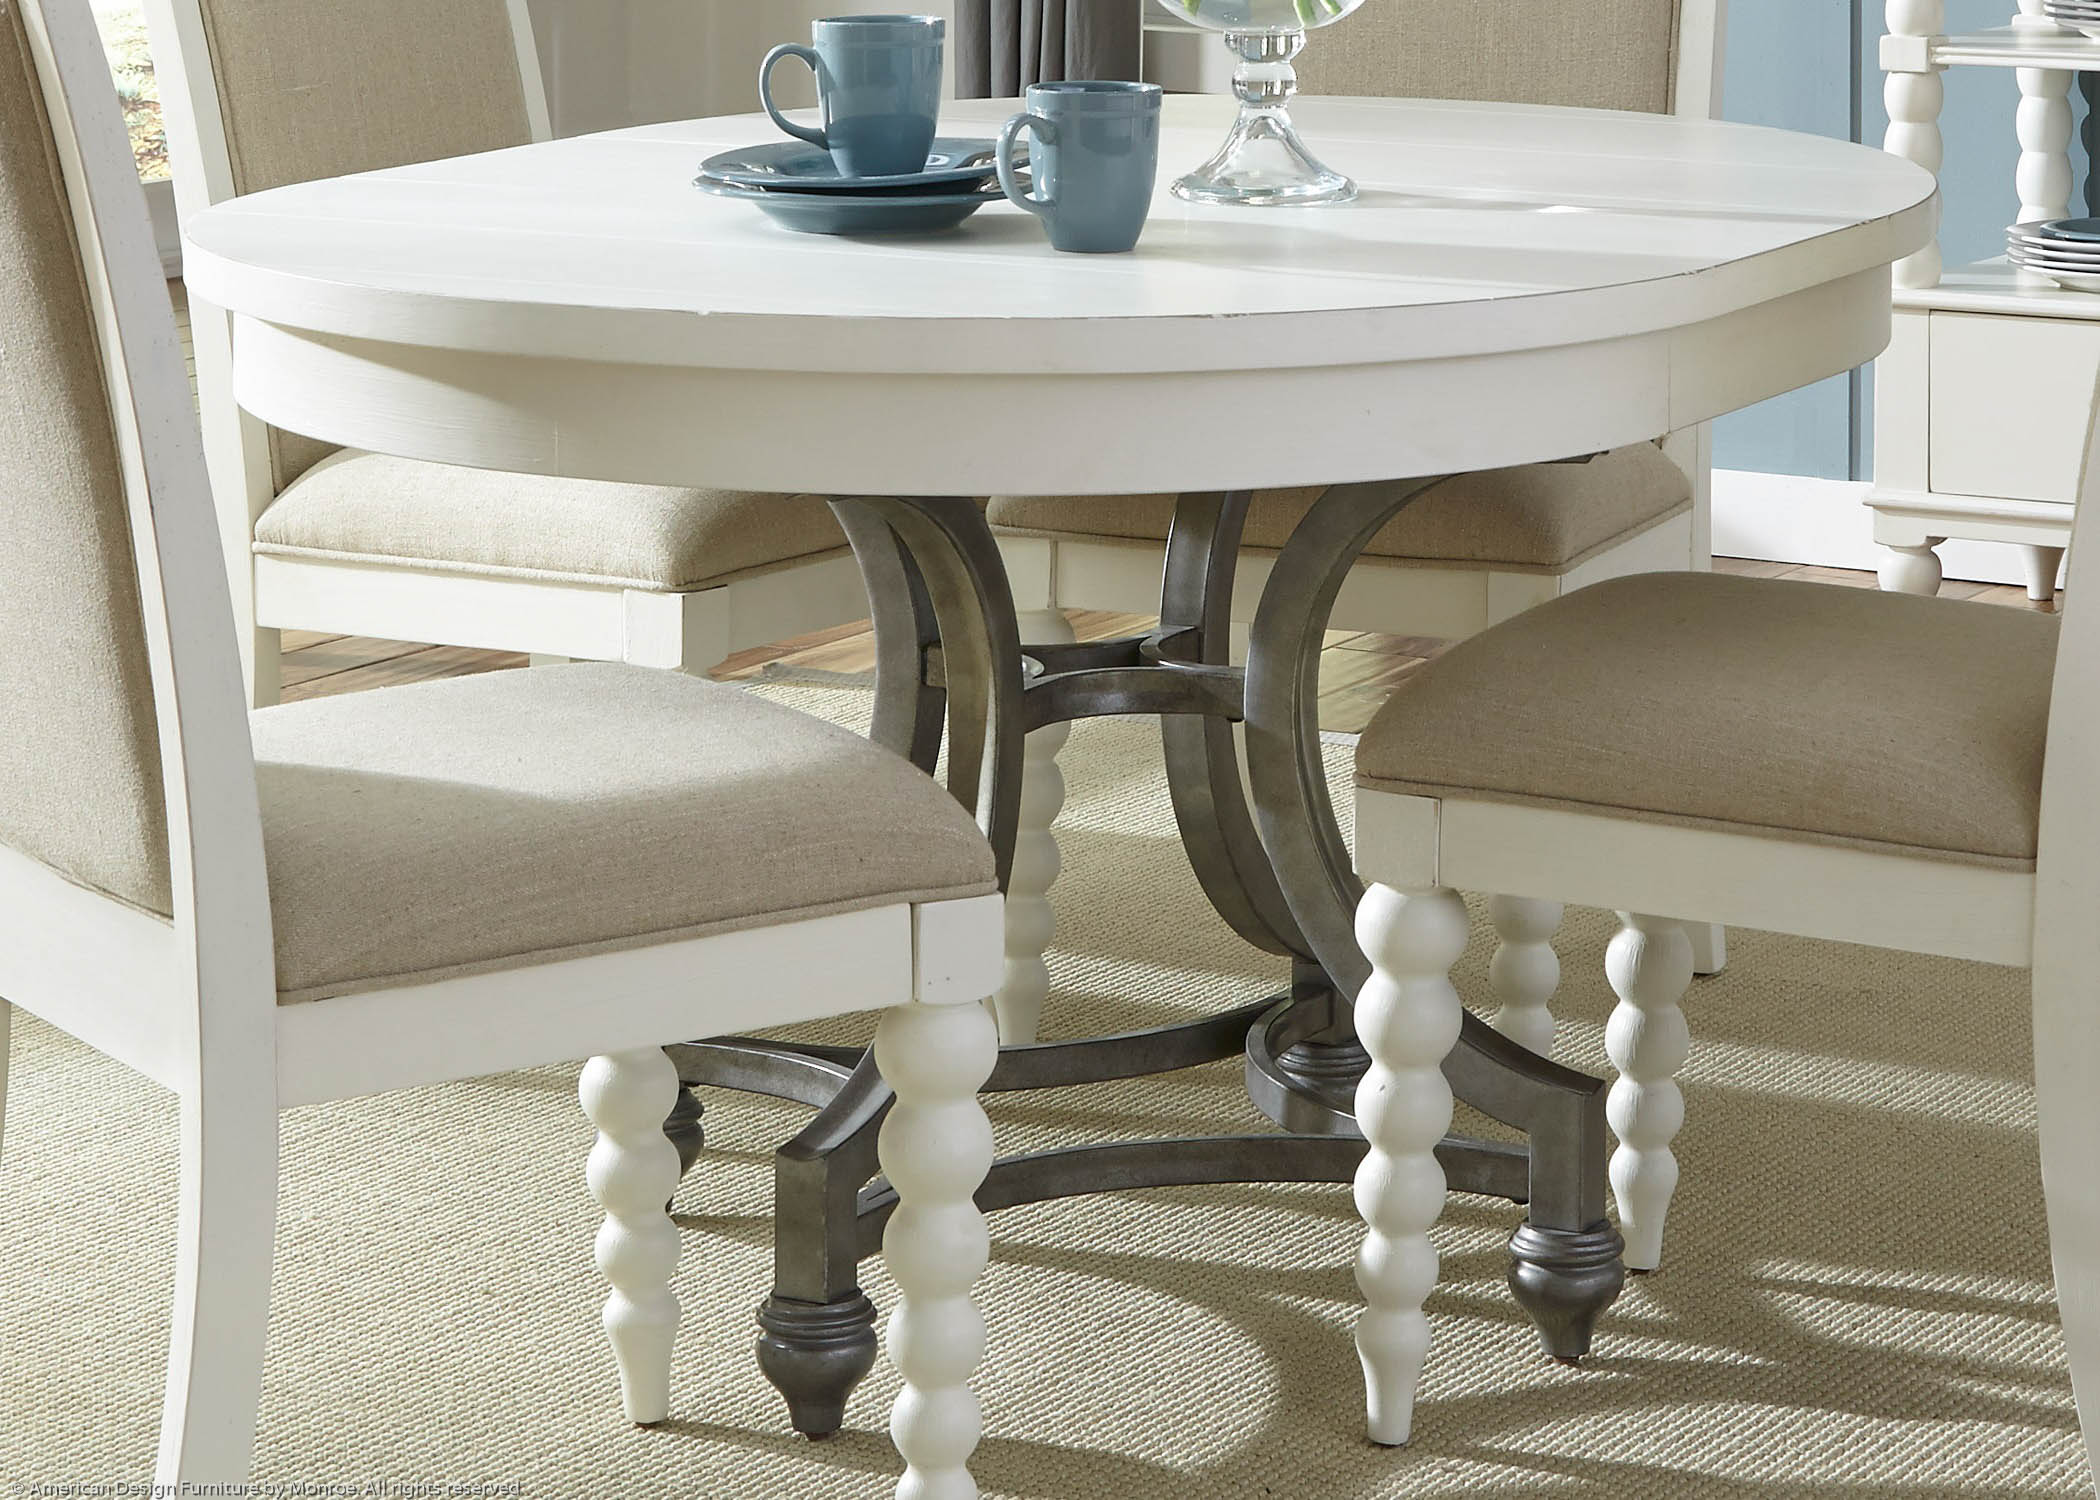 Potomac Casual Table Pic 1 (Heading Round Dining Table)